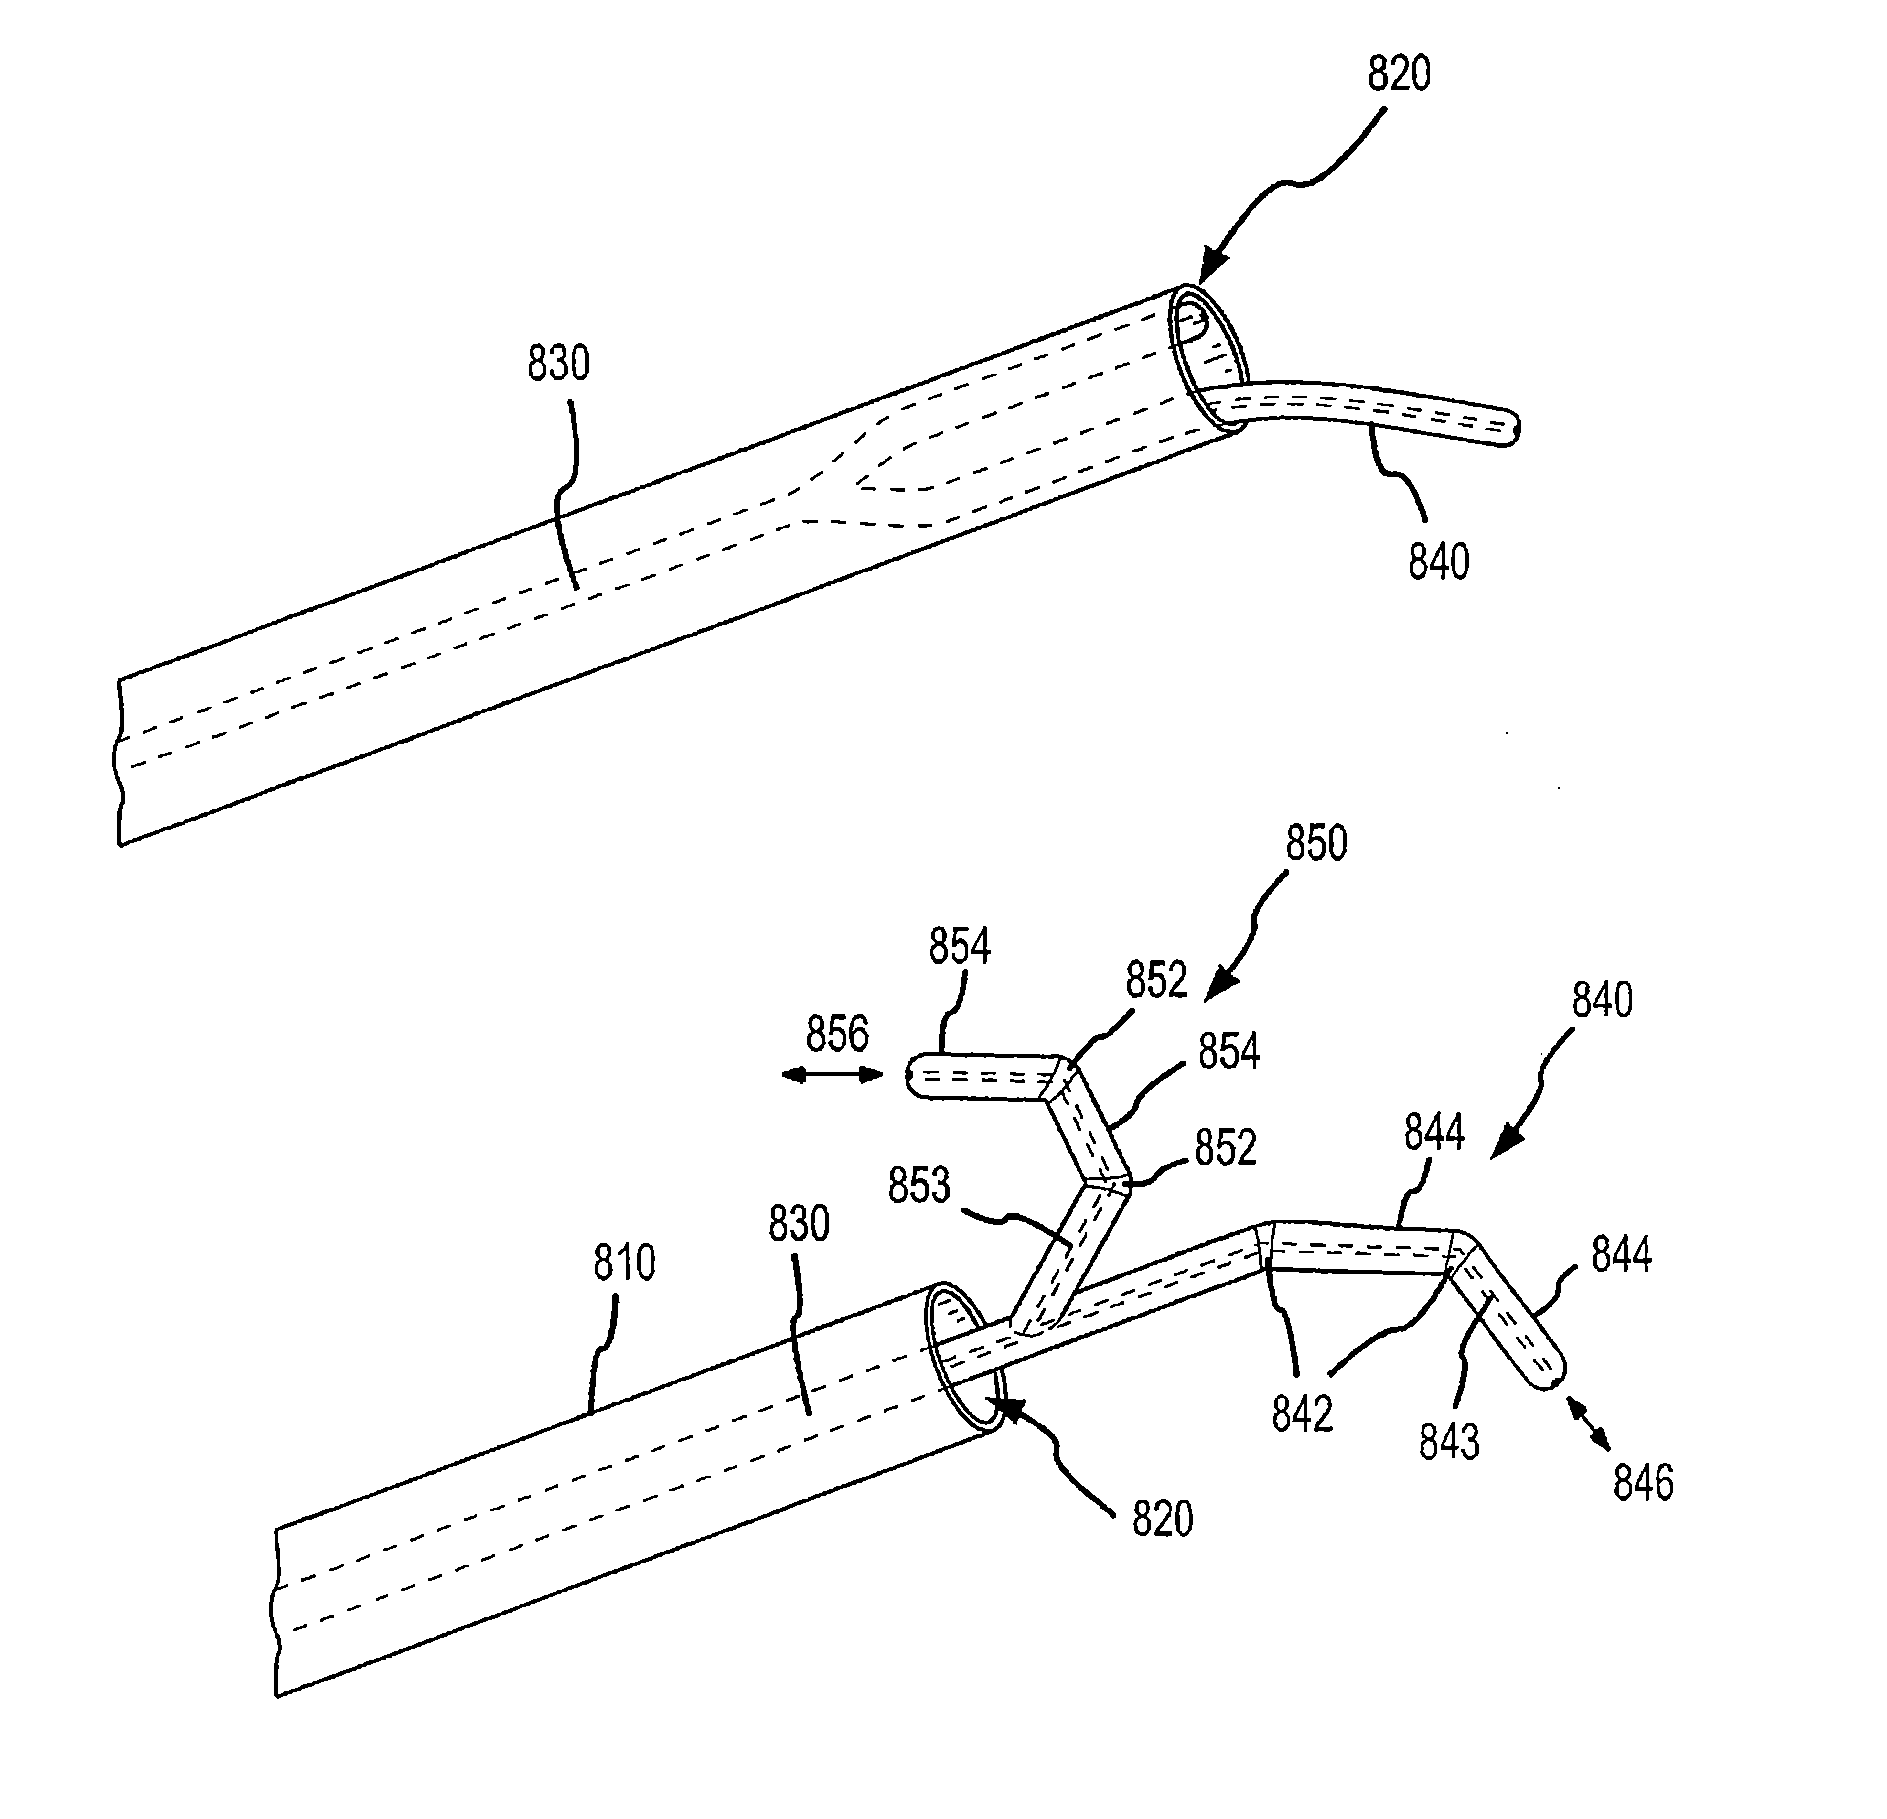 Selective renal cannulation and infusion systems and methods